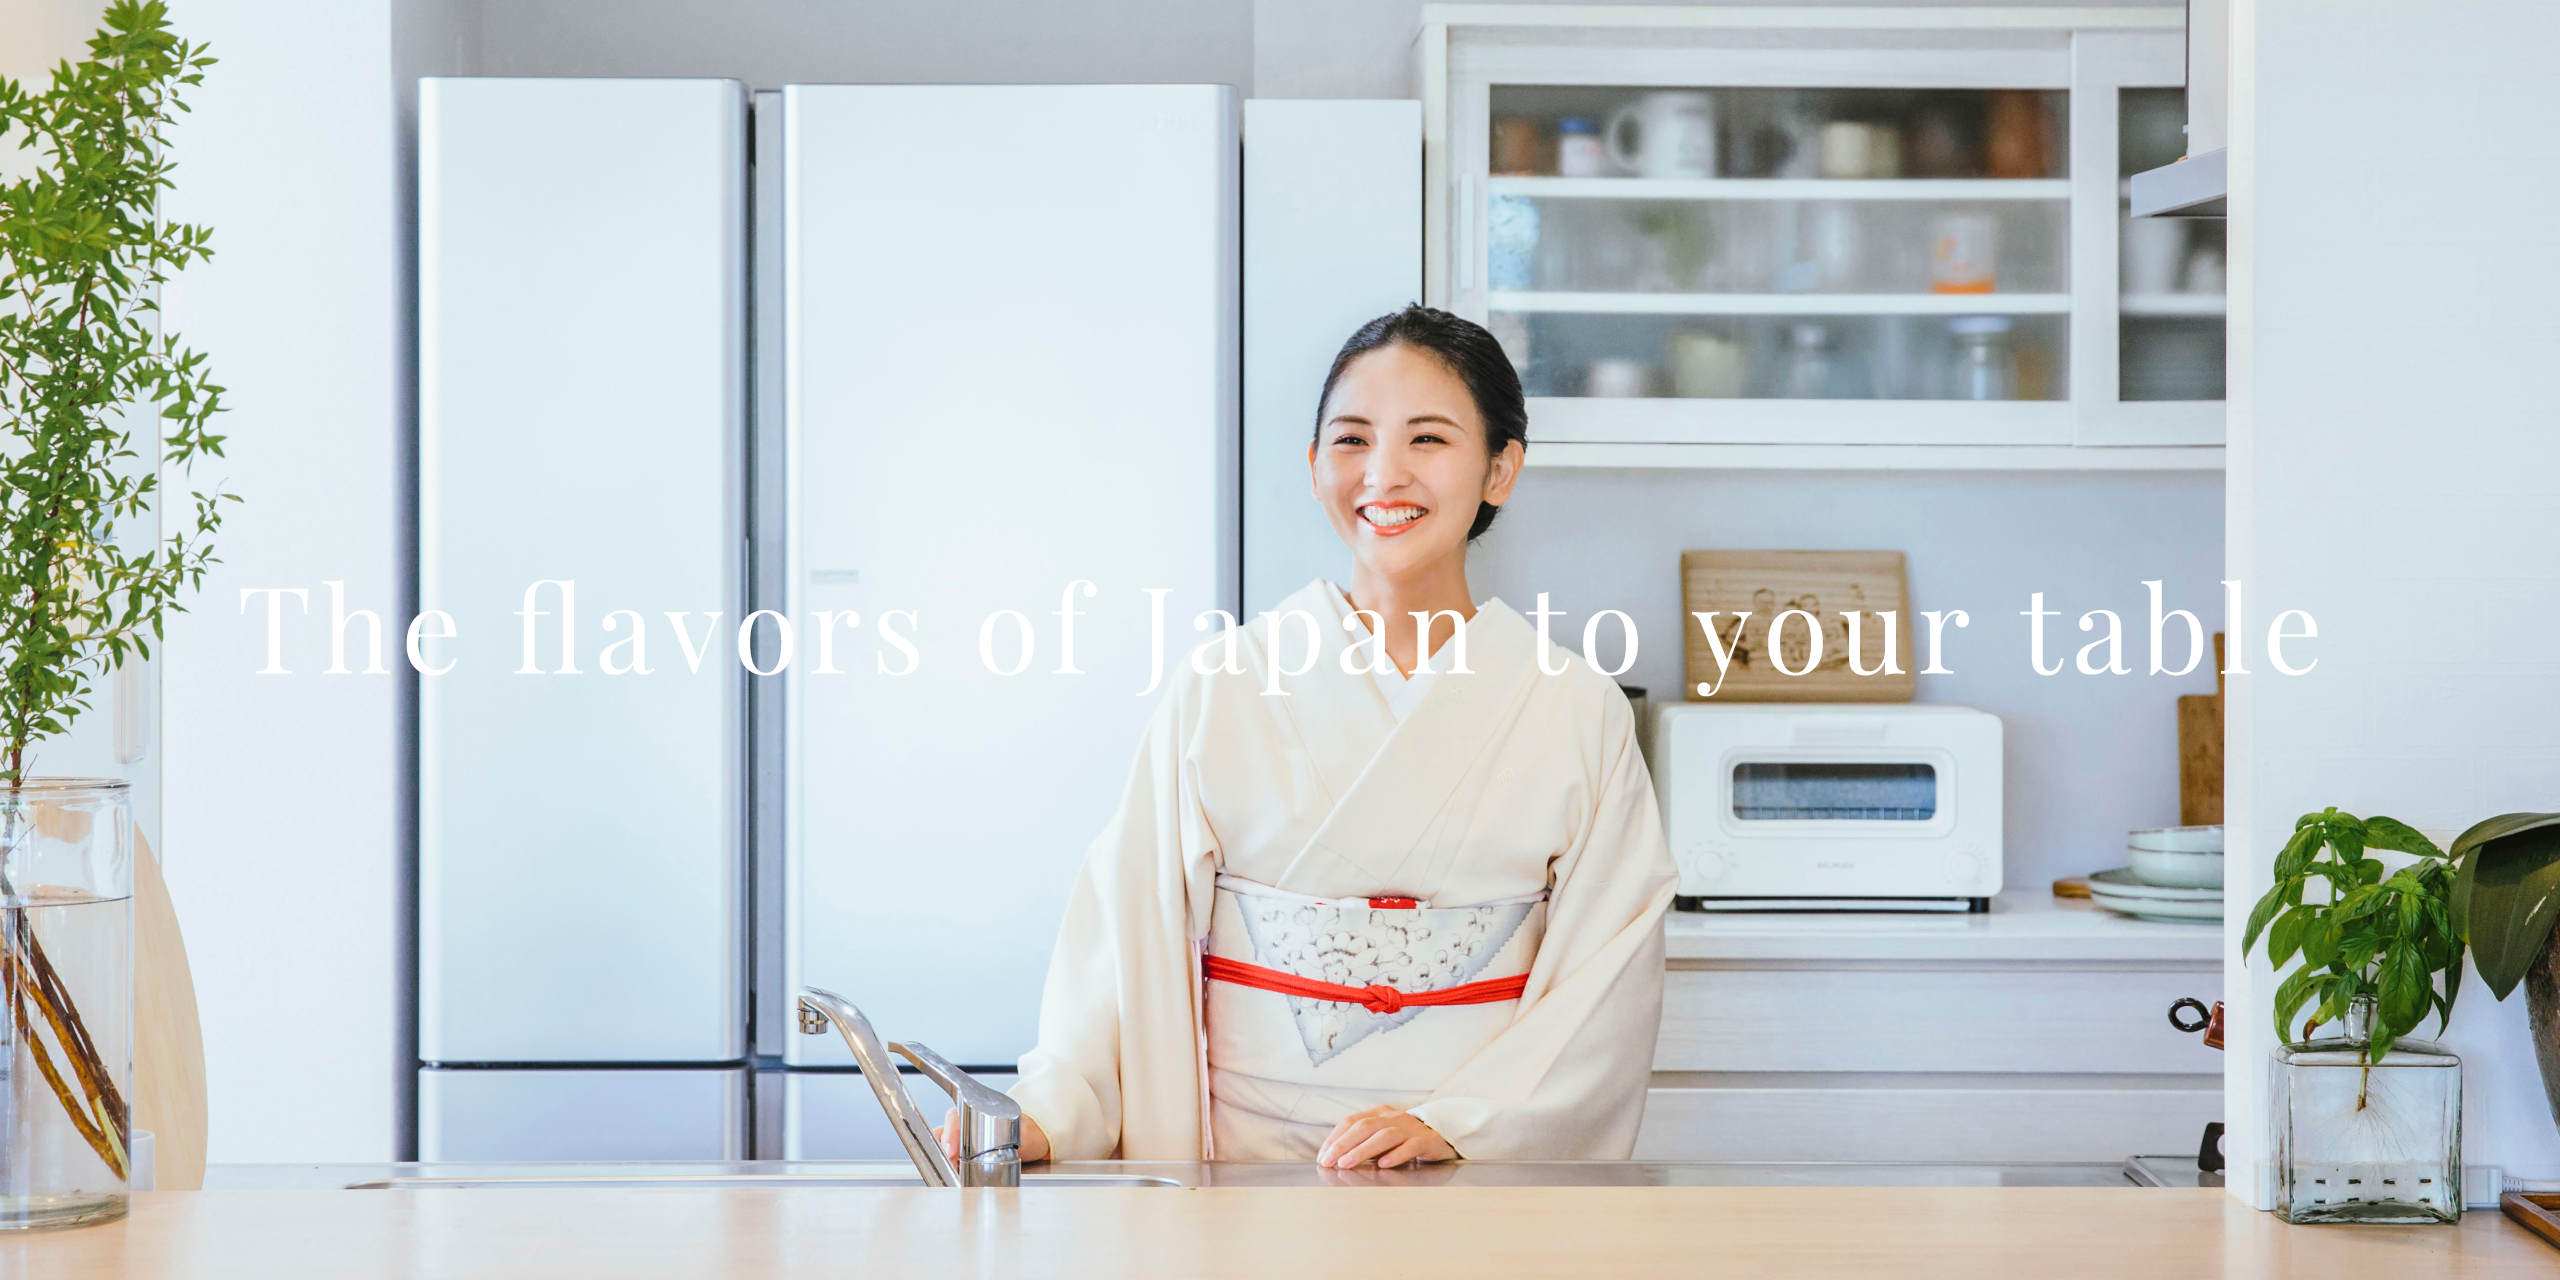 The flavors of Japan to your table